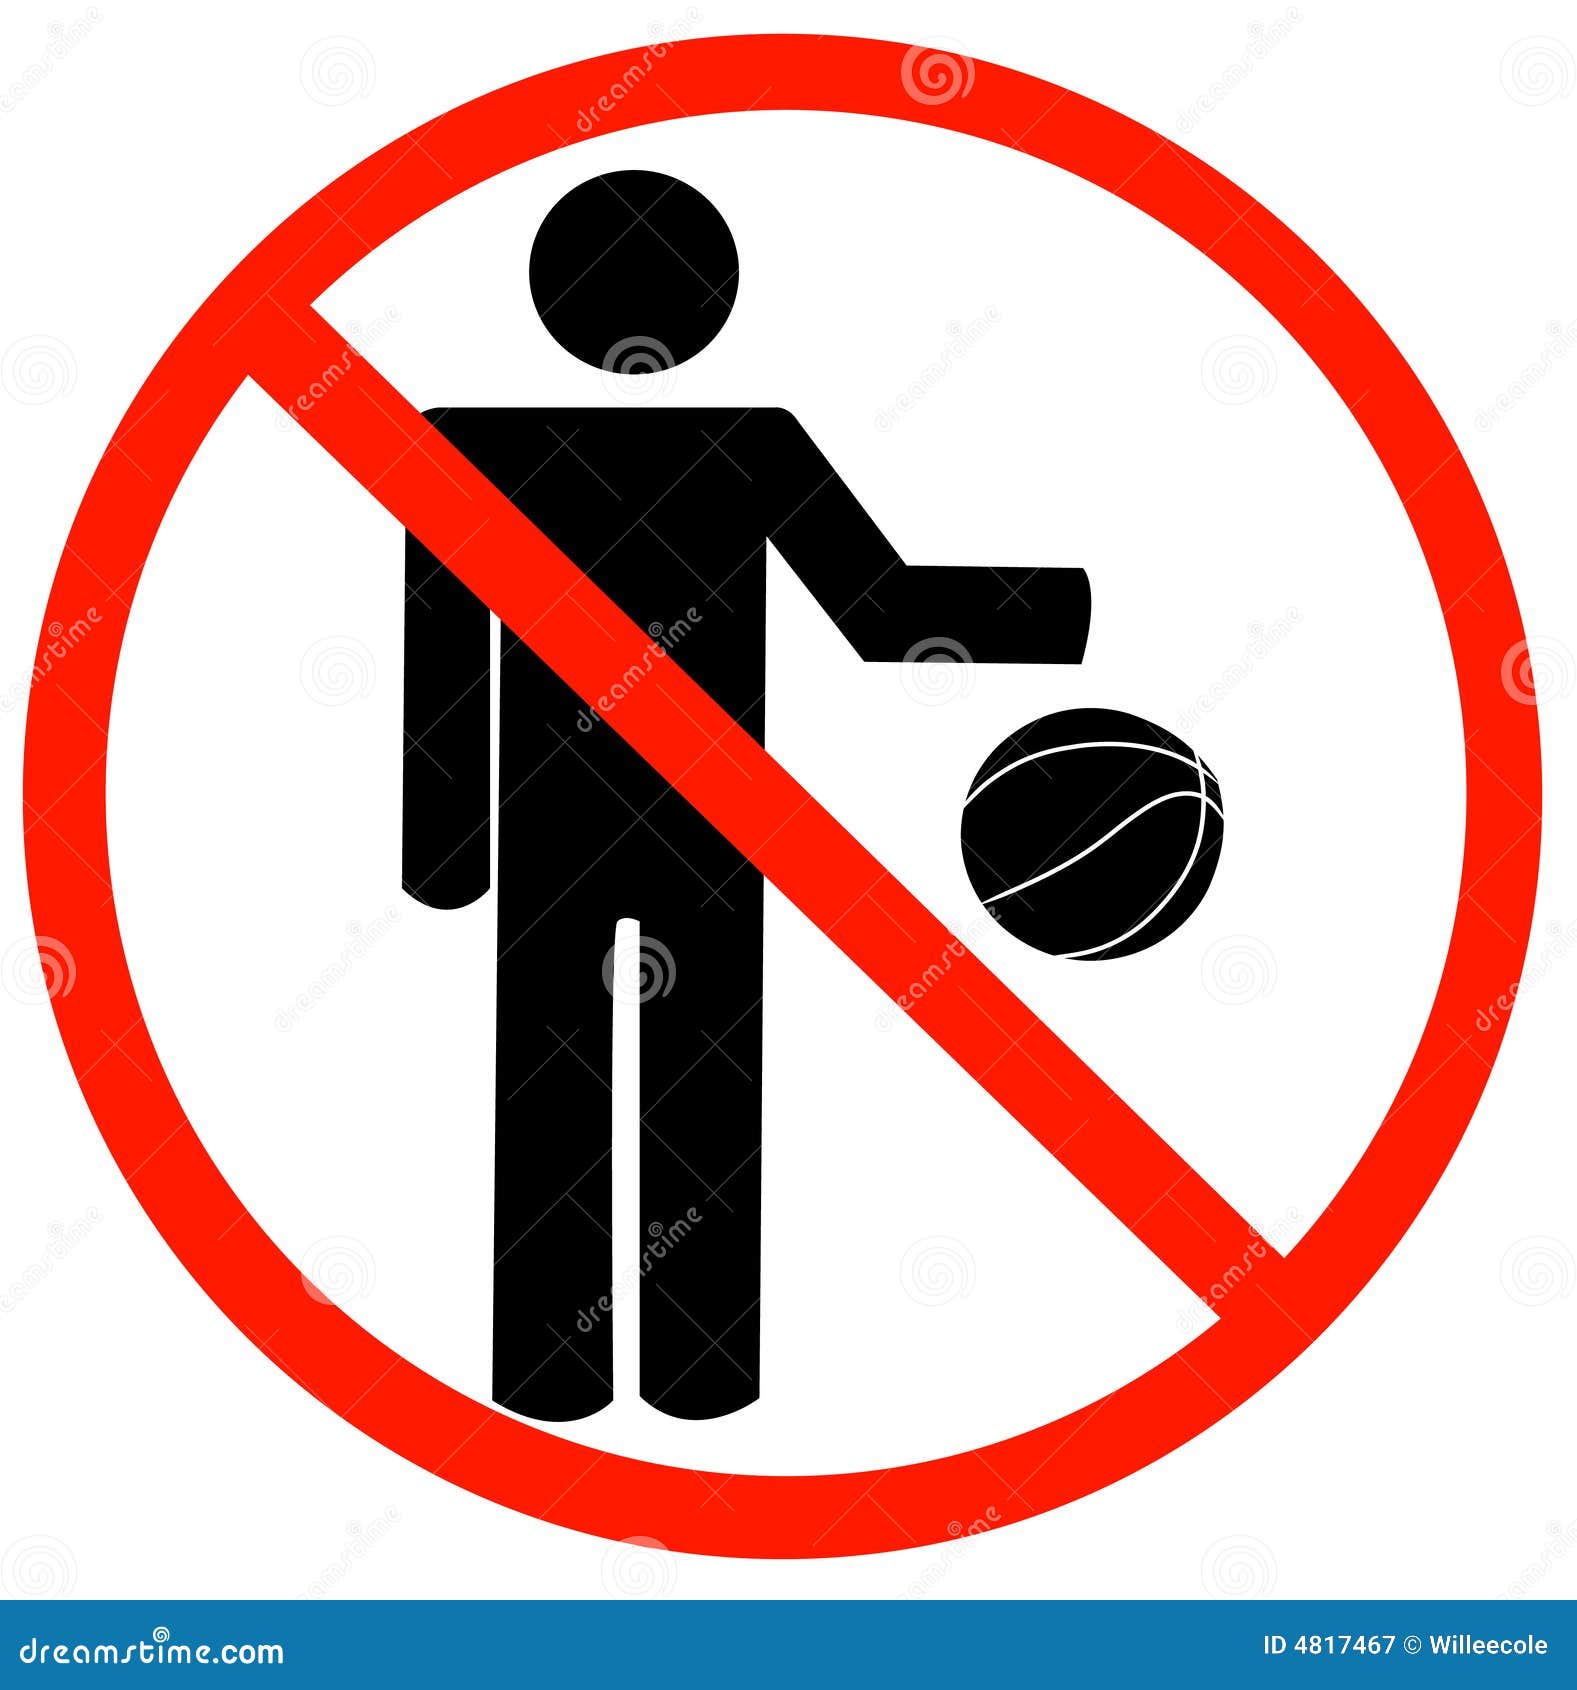 No Playing Allowed Royalty Free Stock Photography - Image: 4817467